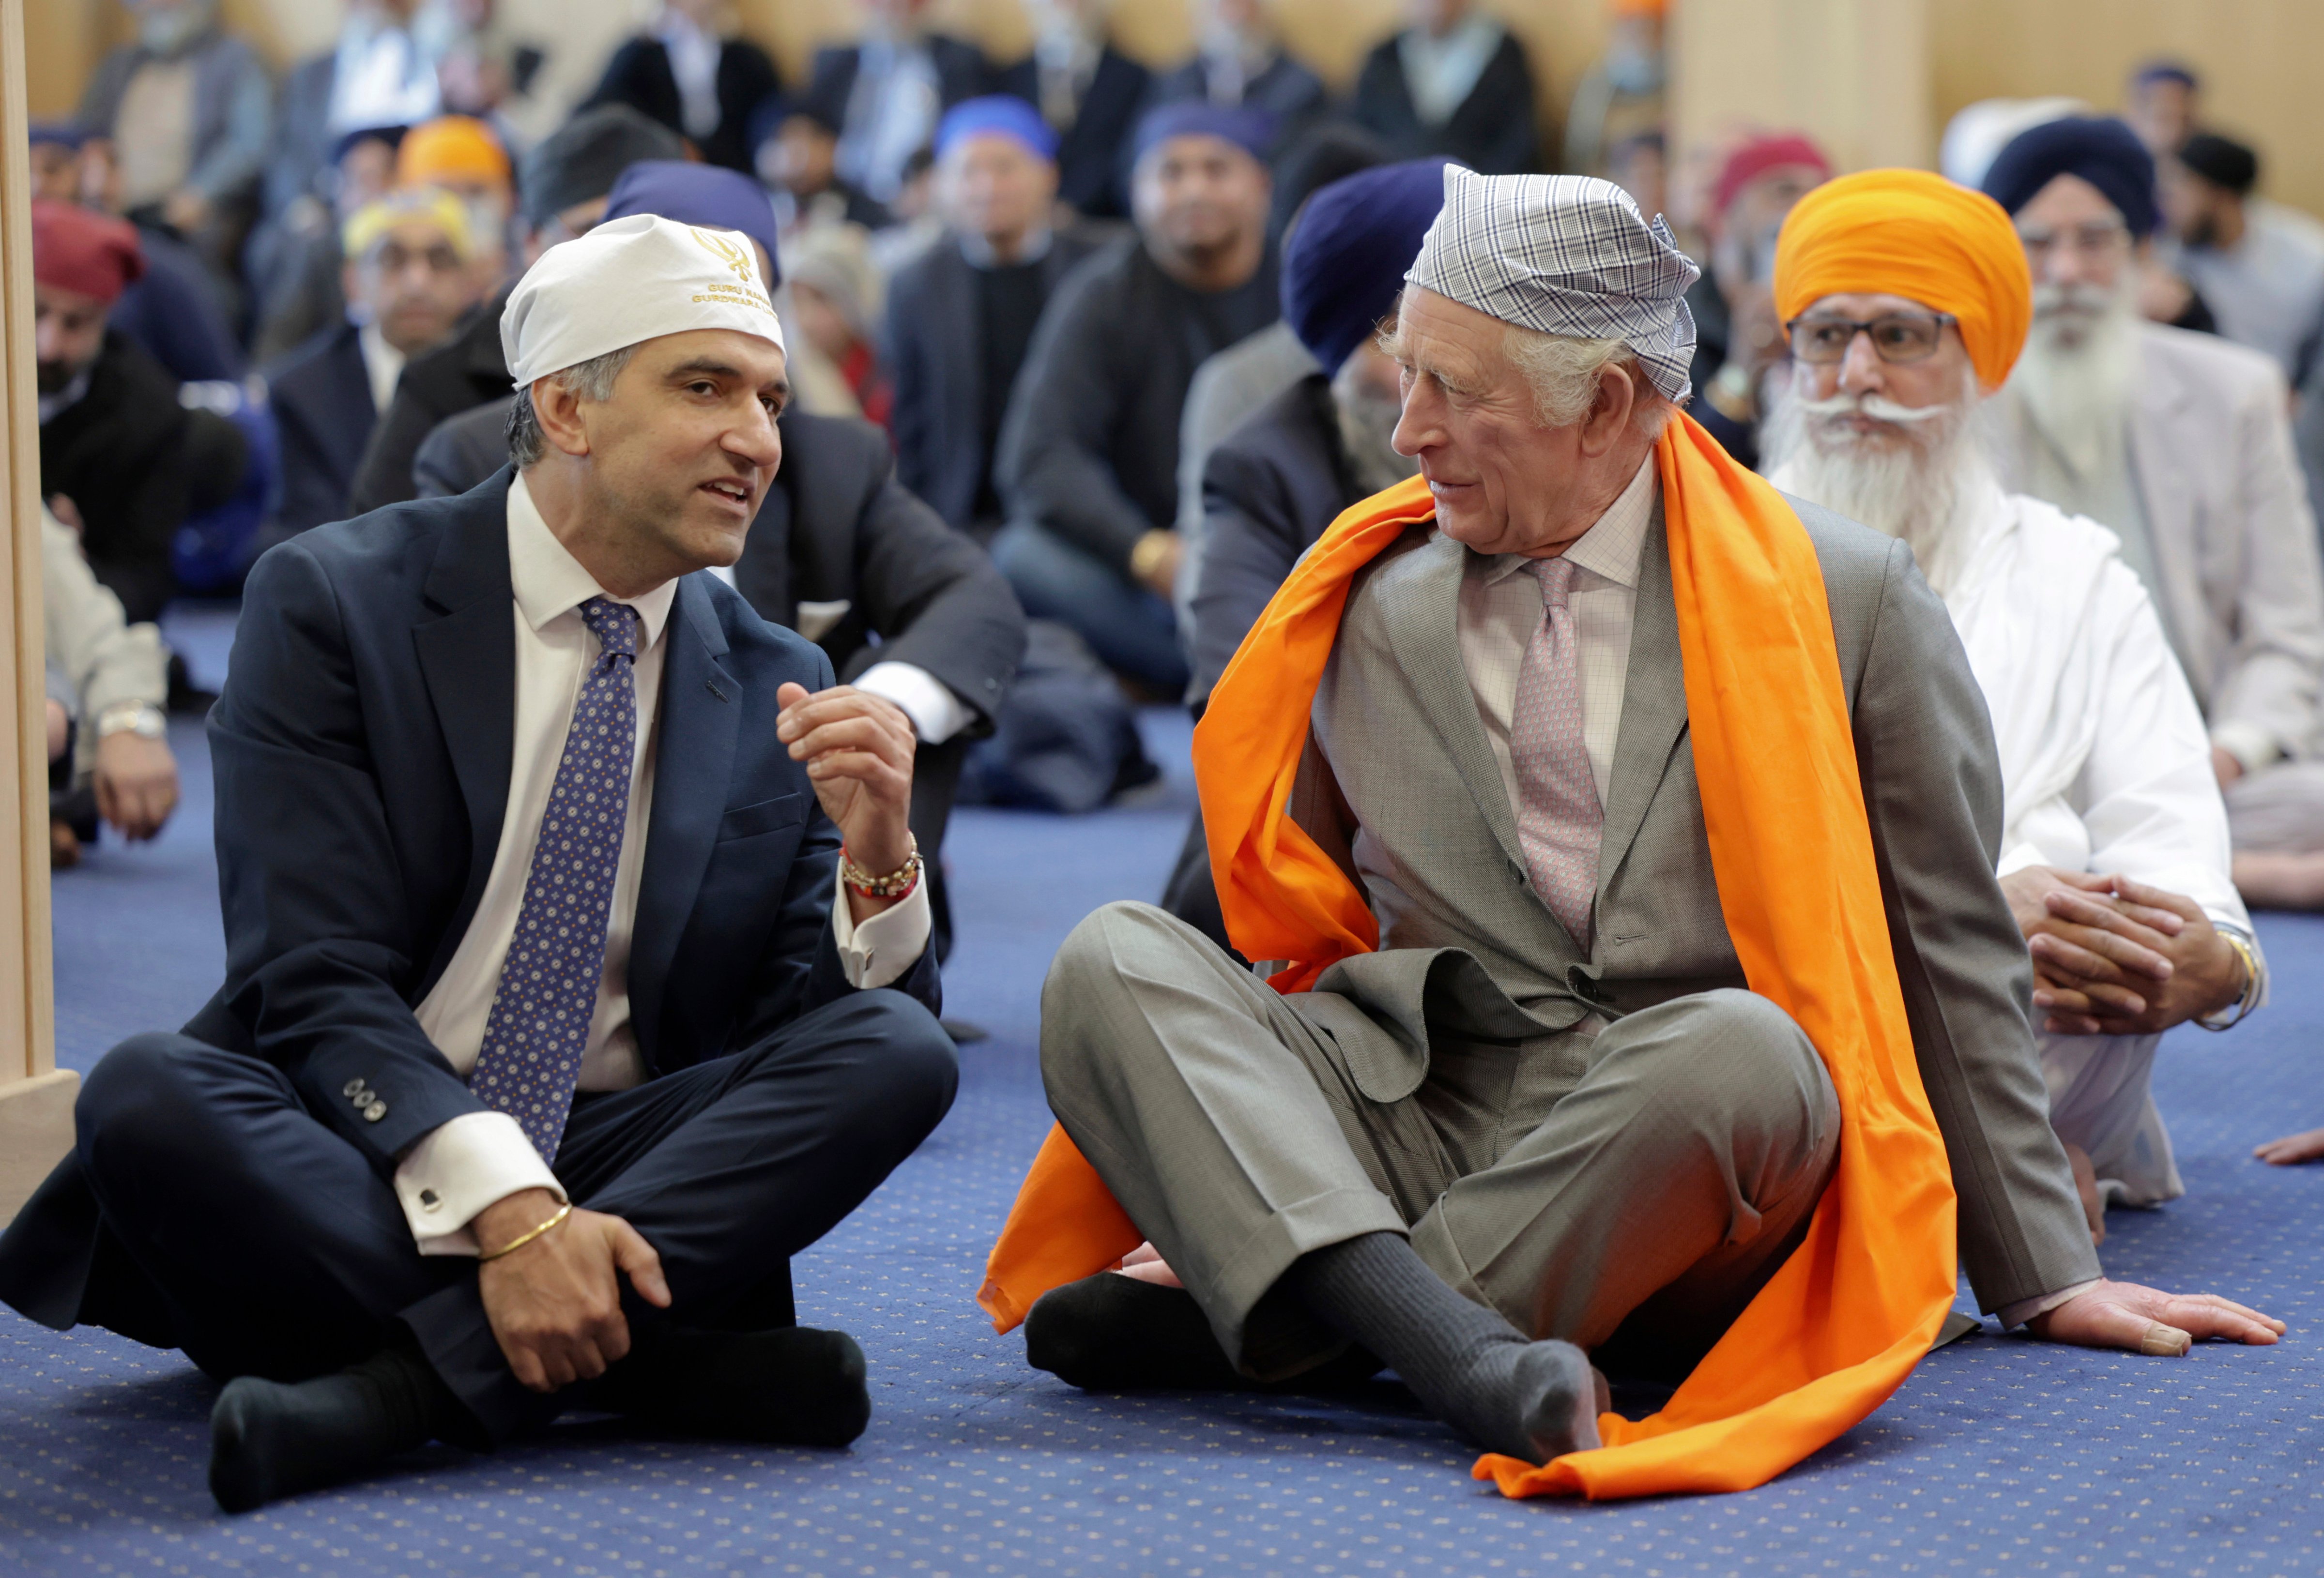 Britain's King Charles III, right, speaks with Professor Gurch Randhawa, a member of the Sikh Congregation, as they sit on the floor in the Prayer Hall during the king's visit to the newly built Guru Nanak Gurdwara, in Luton, England, Tuesday, Dec. 6, 2022. (Chris Jackson—Pool Photo via AP)